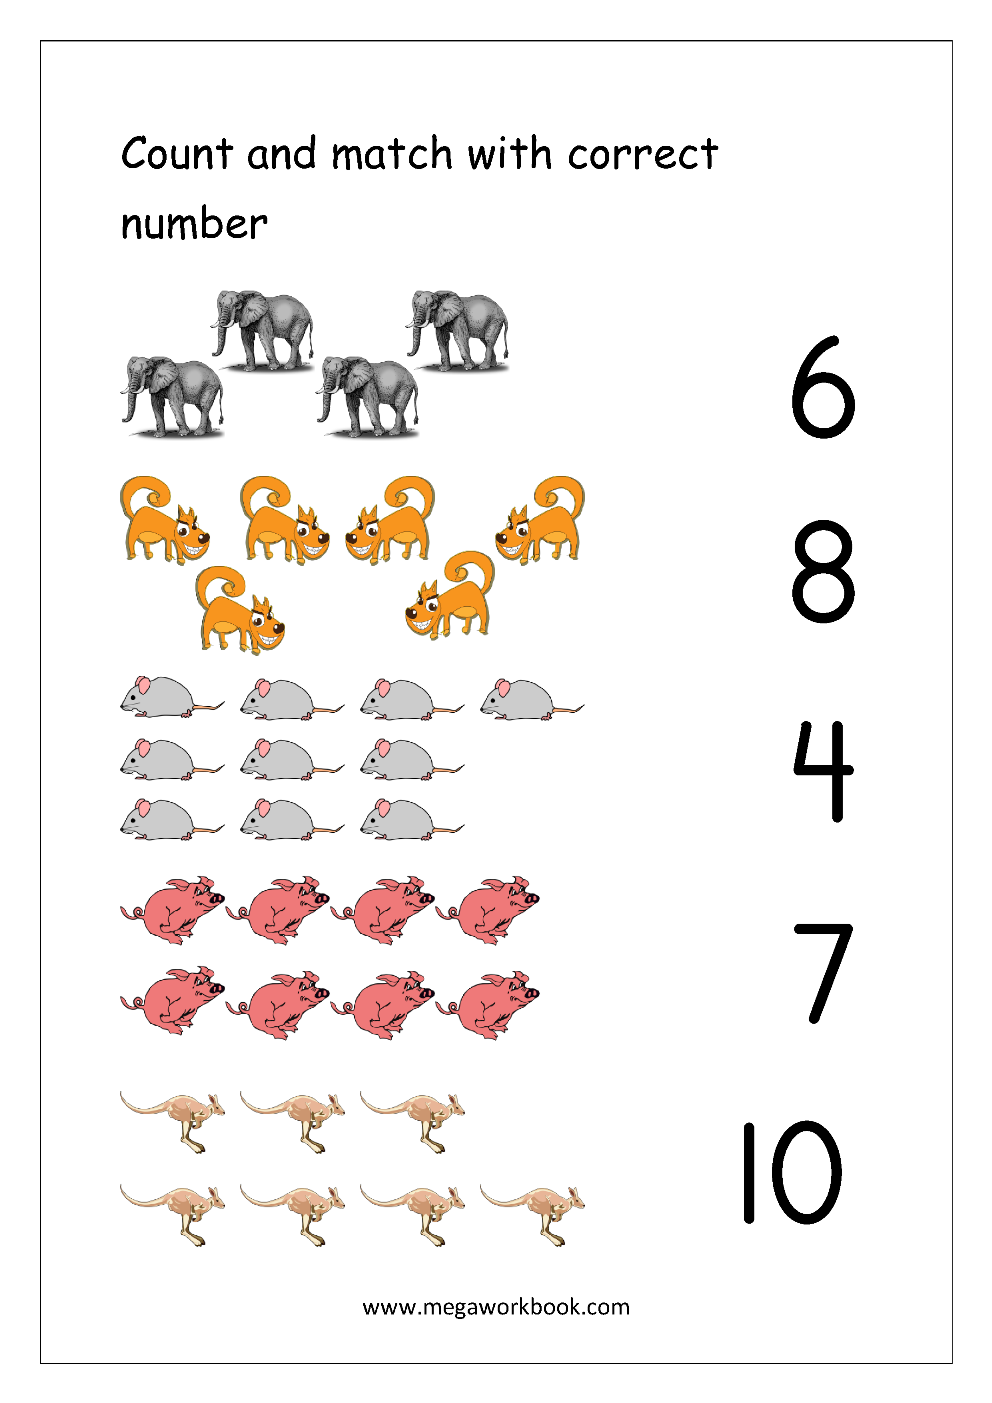 Each a from 1 to 5. Count and Match 1-10. Number matching 1-10. Count Worksheets. Counting numbers для детей.